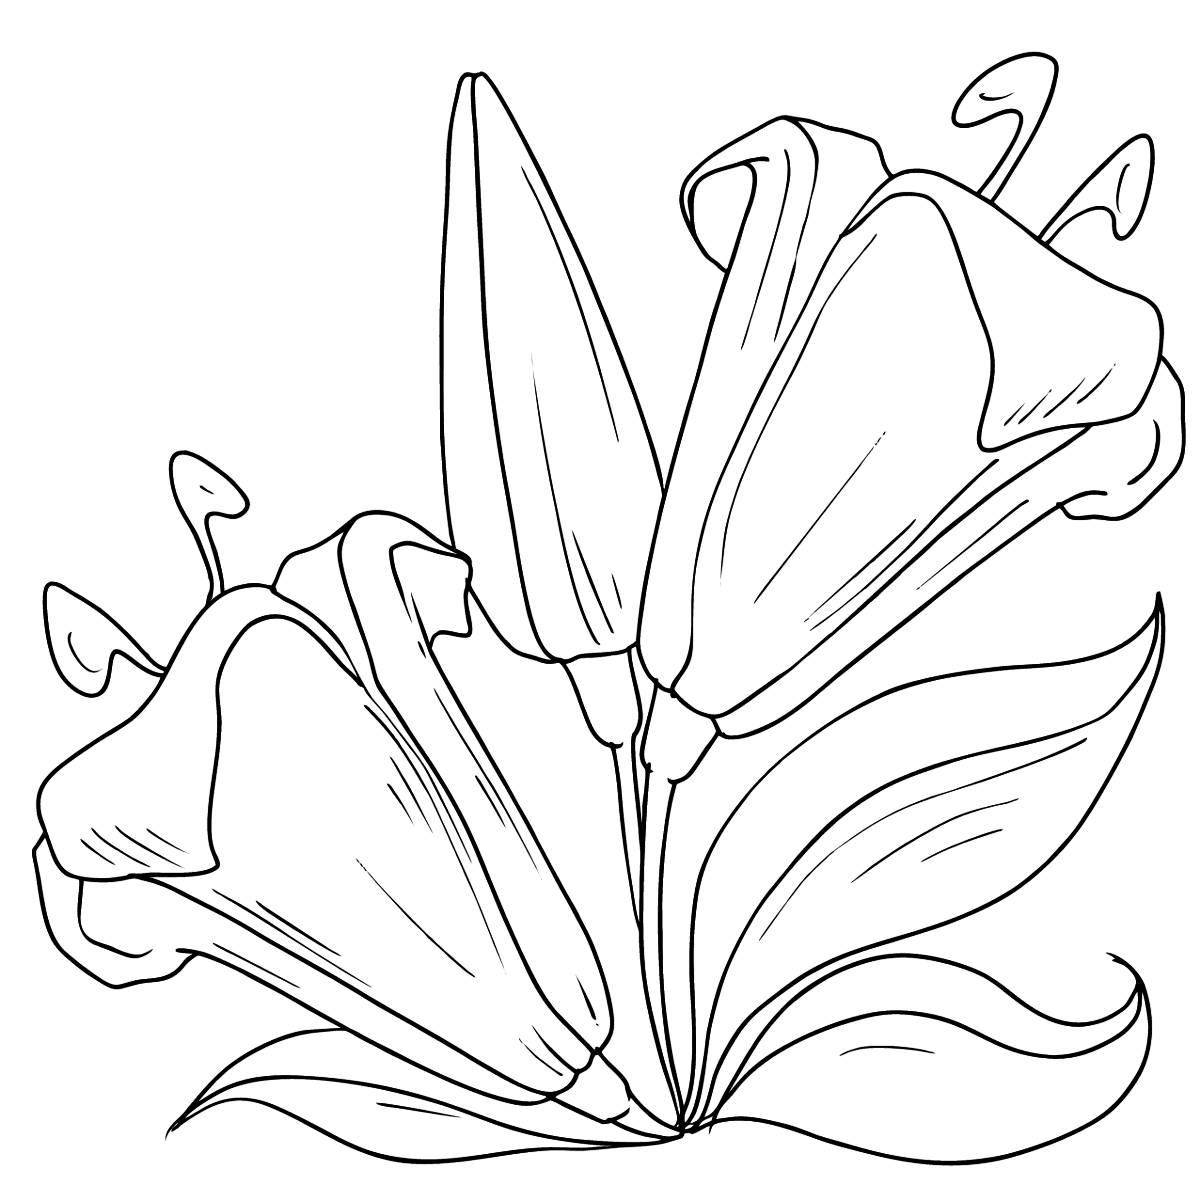 Delightful lily coloring book for kids